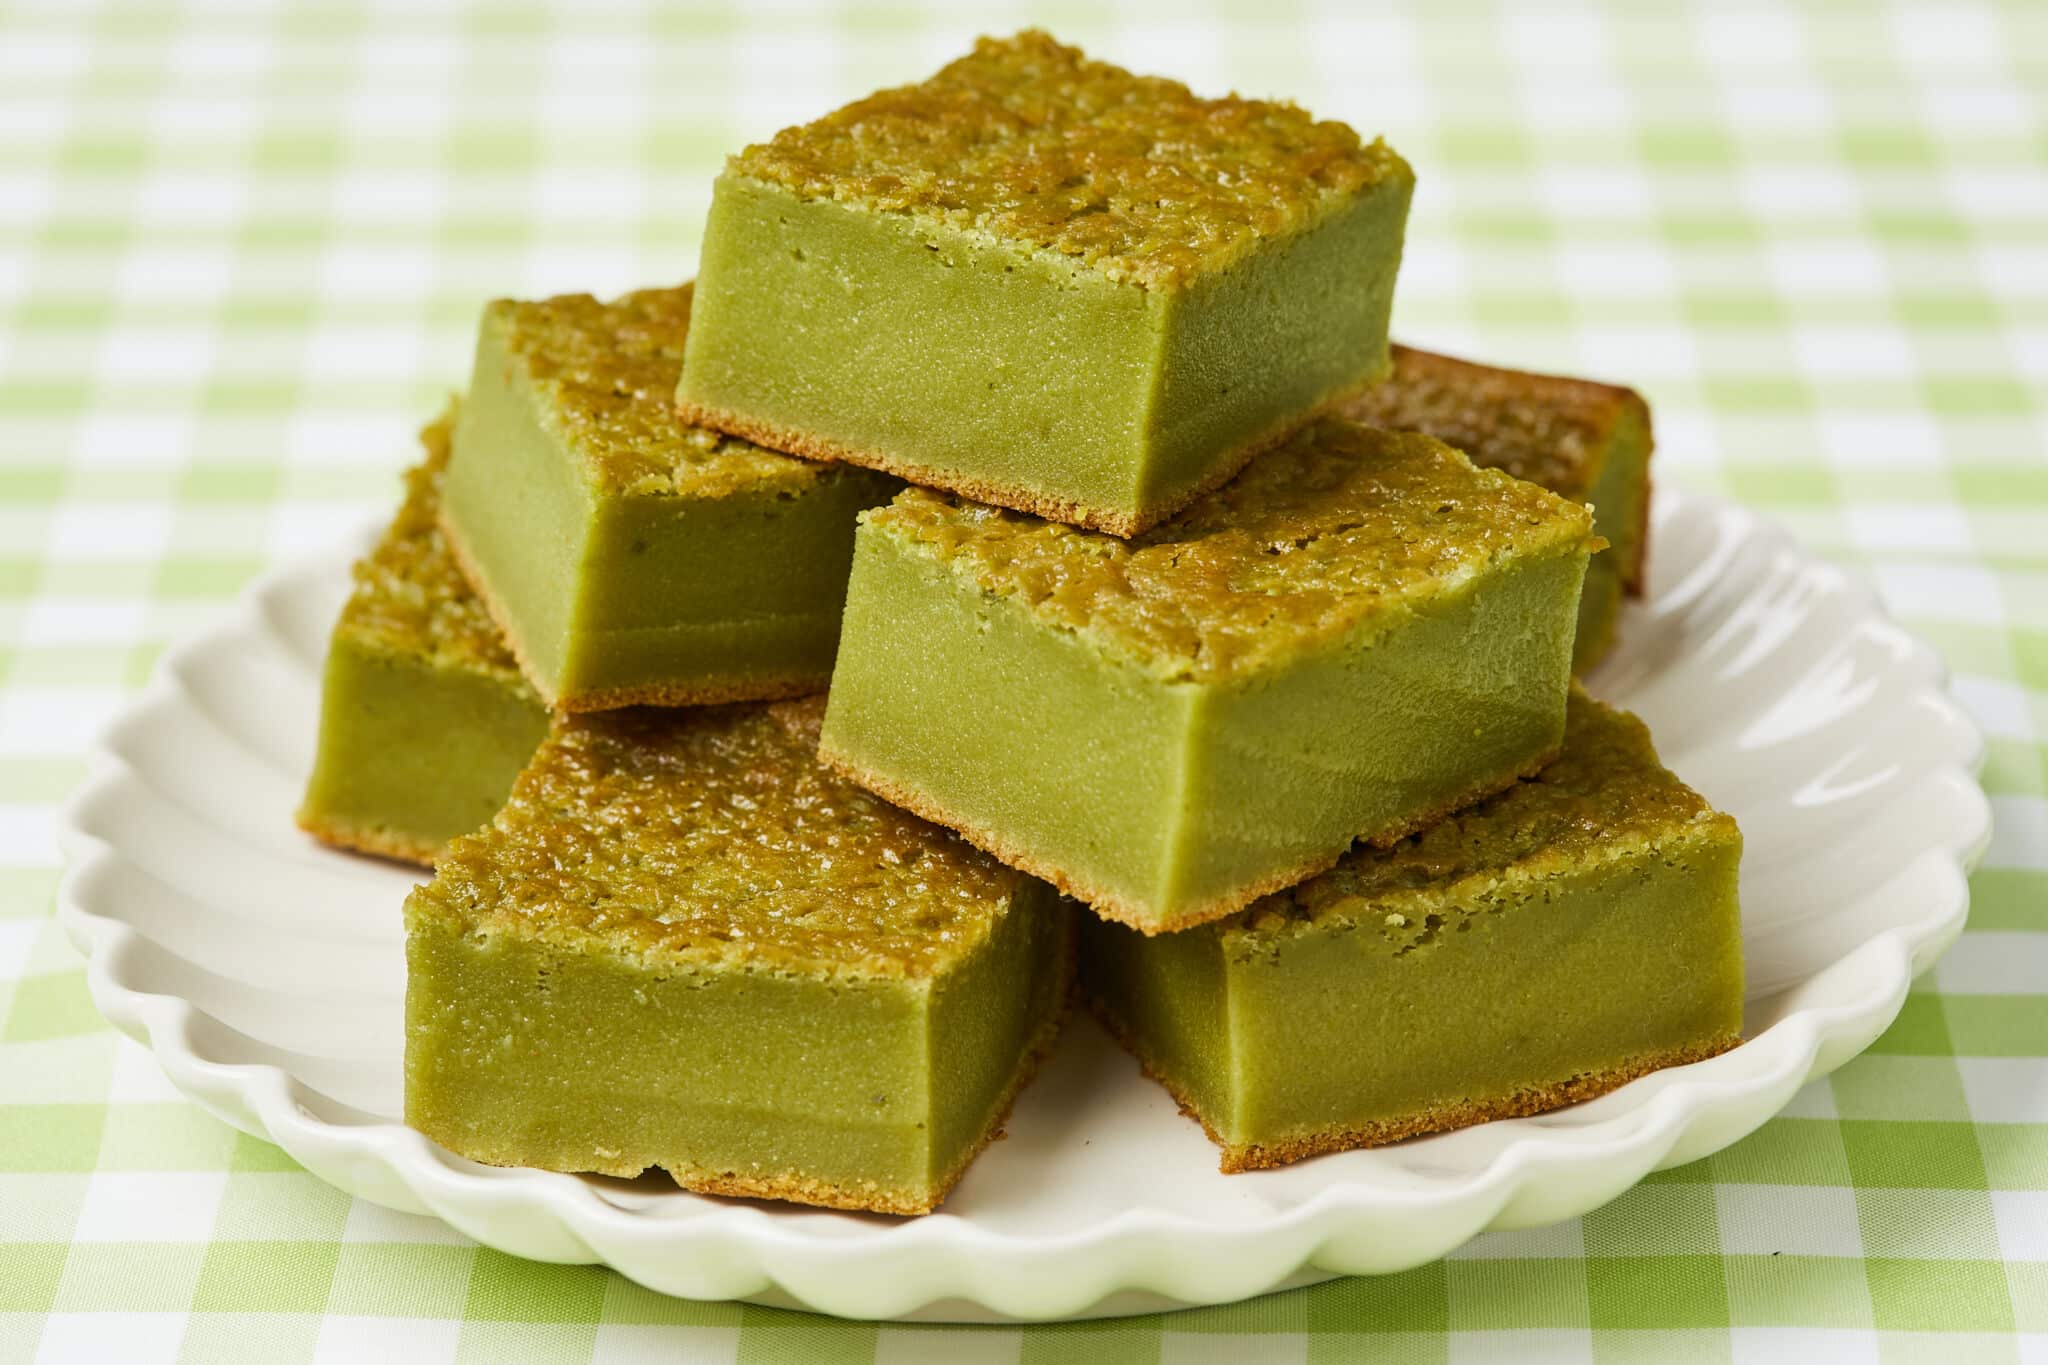 6 squares of rich Matcha Butter Mochi are placed on a white scalloped-edge plate. The green tea sweet rice cake has golden crispy crust on top and at the bottom, with green chewy and soft center. 